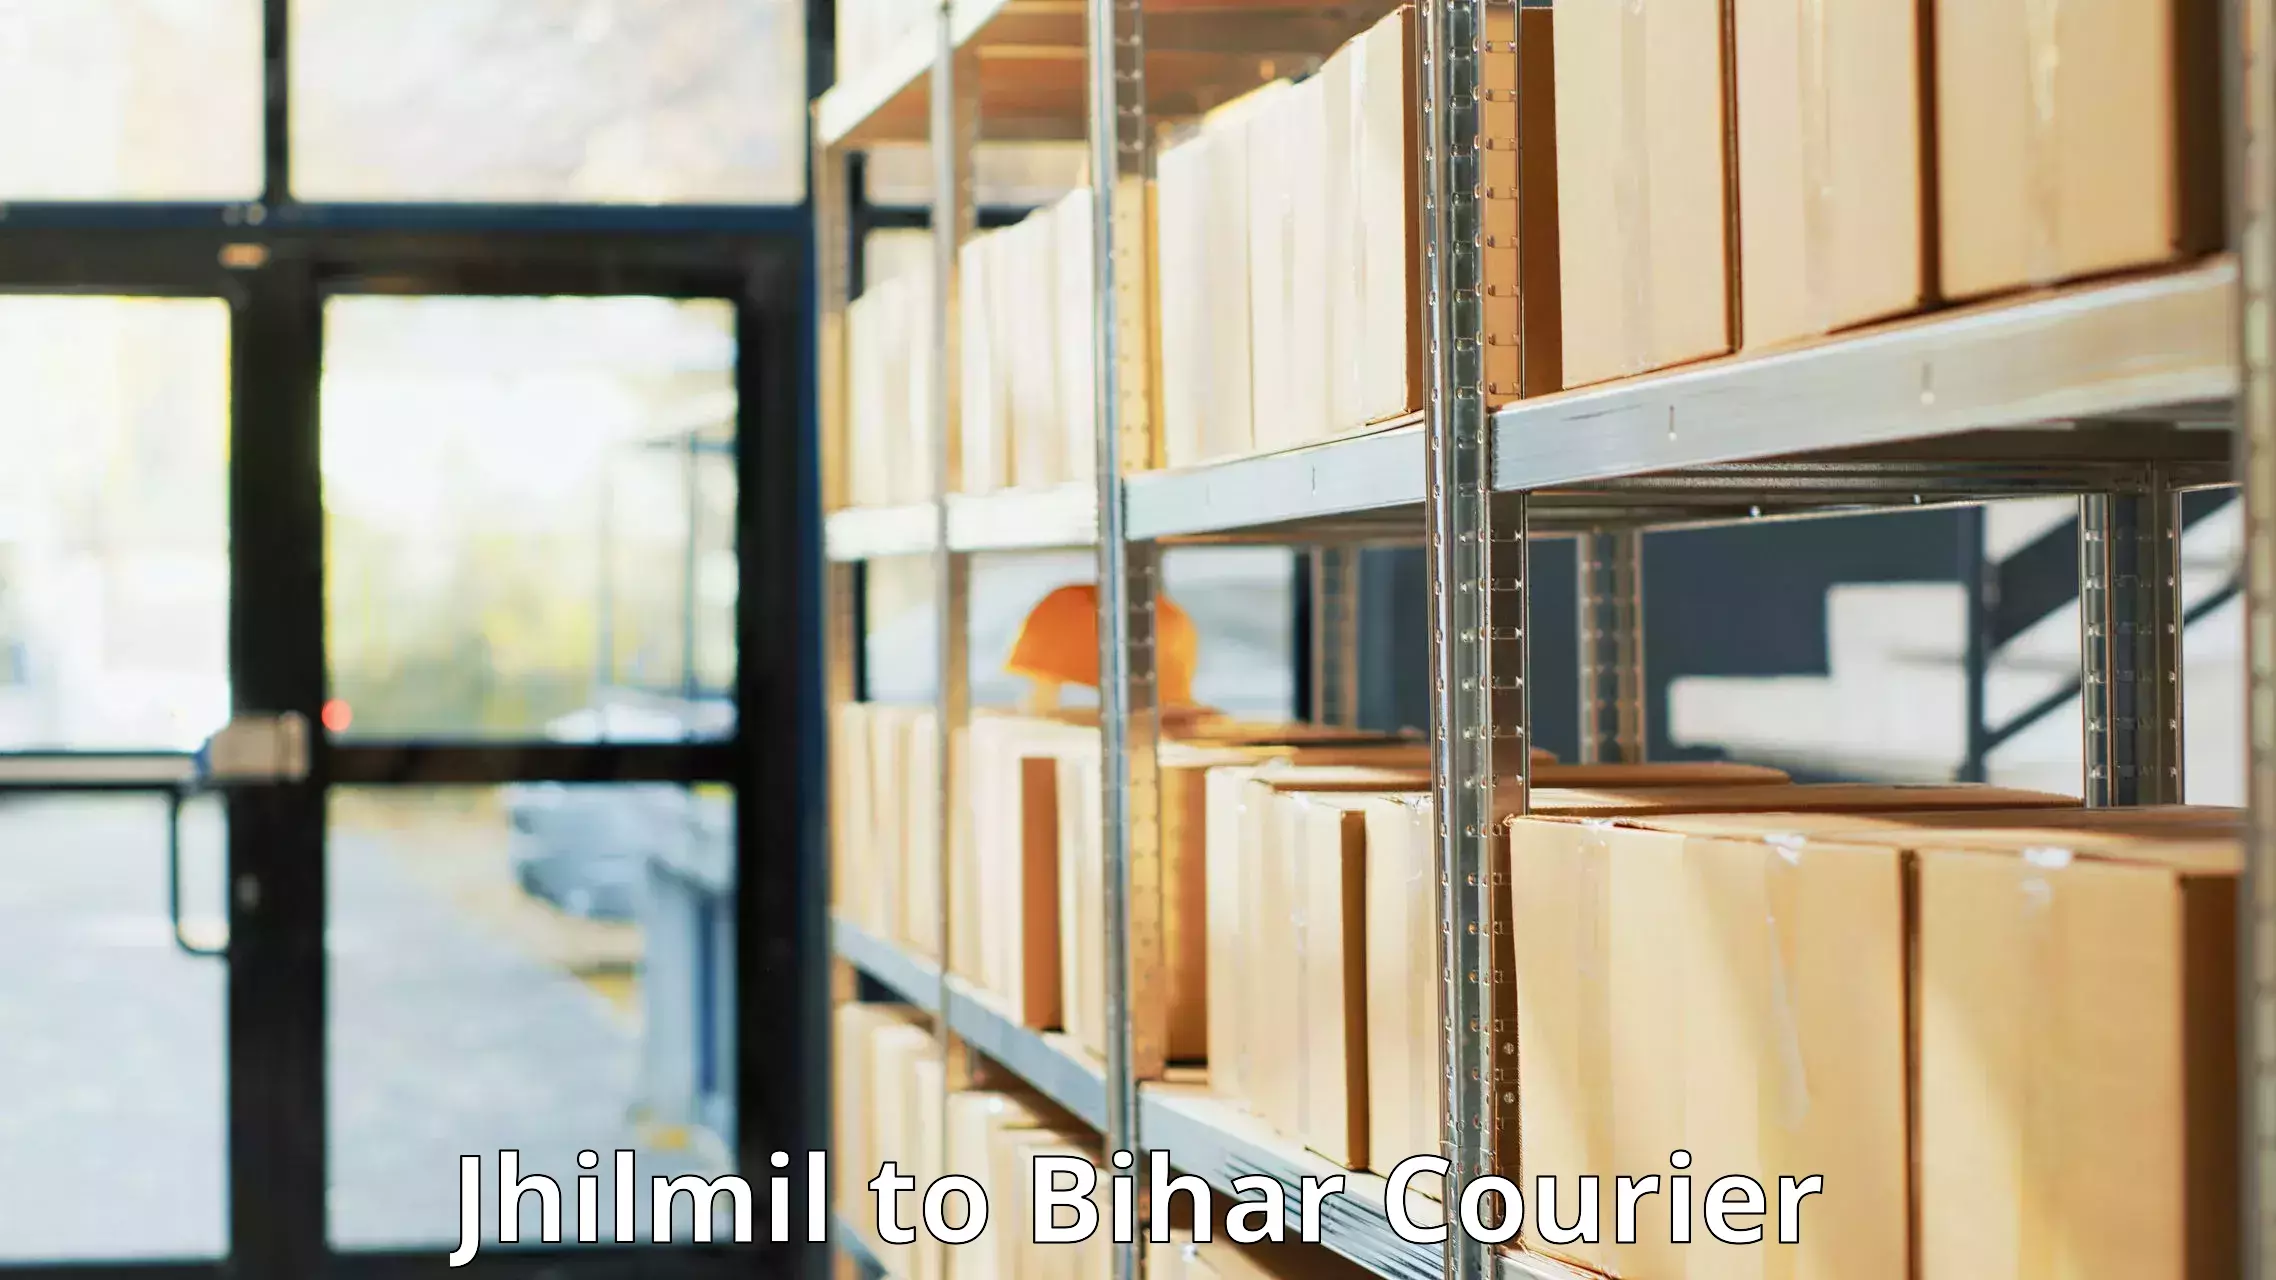 Courier service partnerships Jhilmil to Bhorey